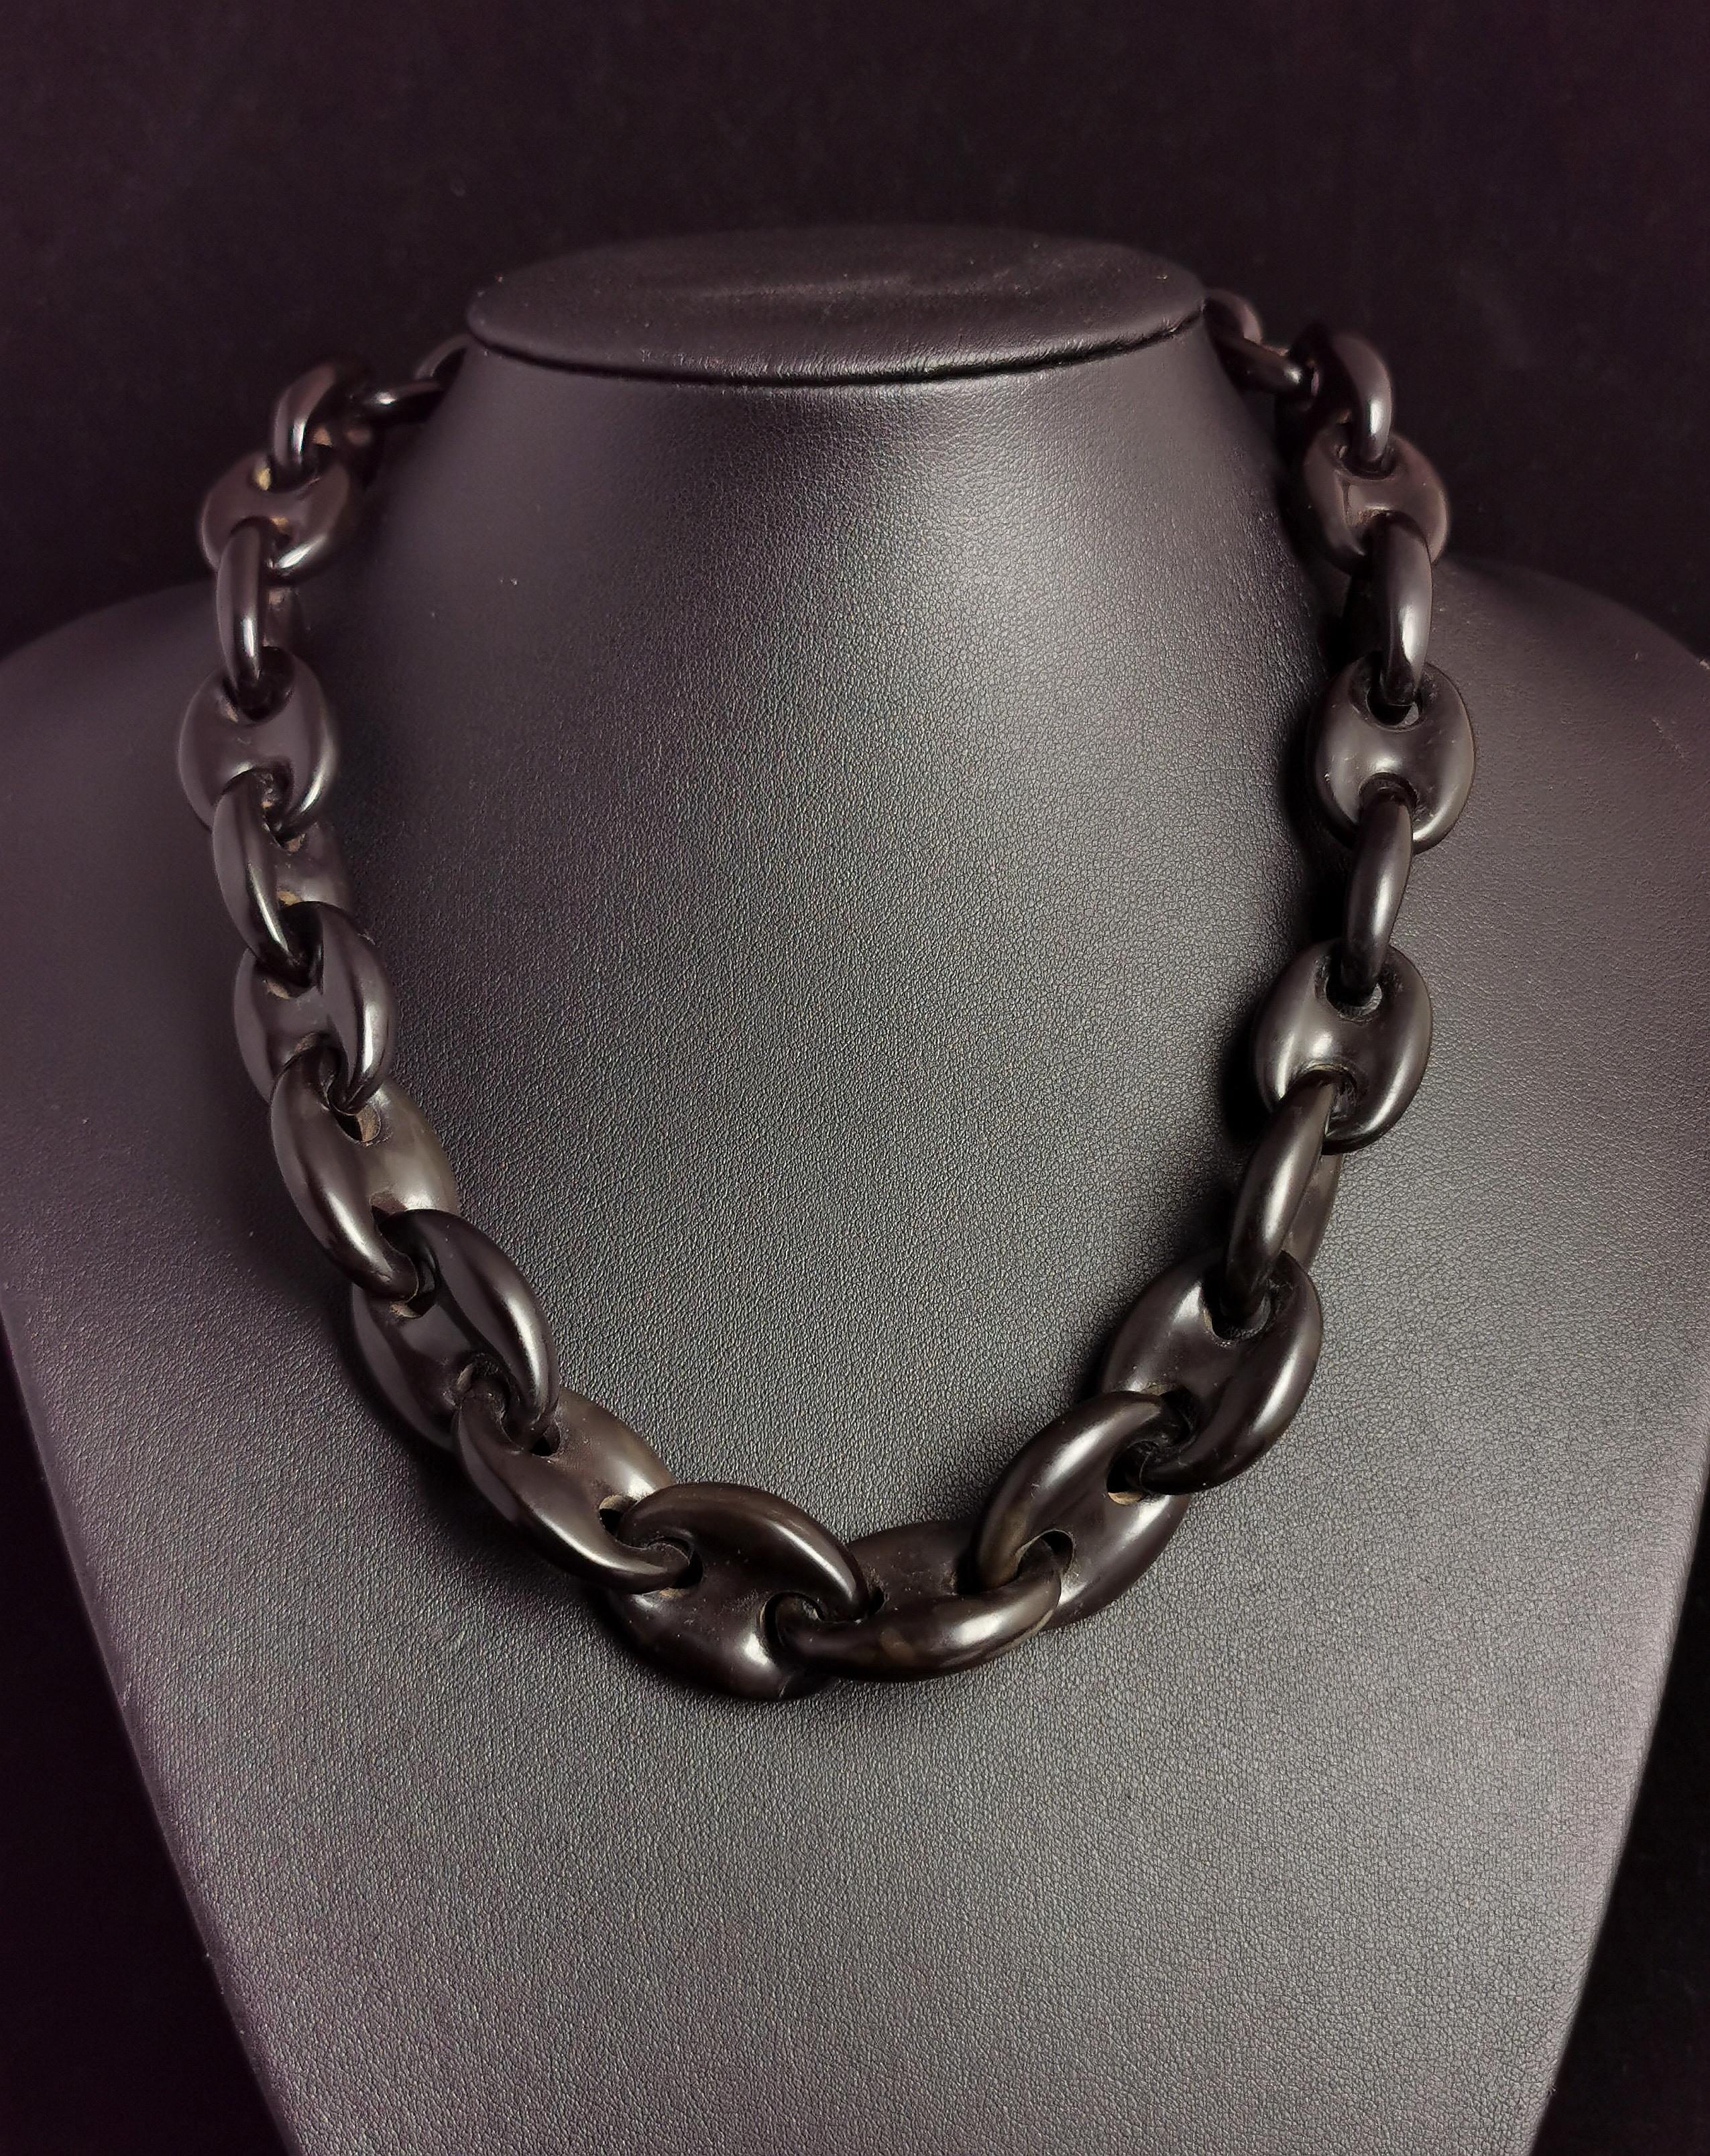 A beautiful antique Victorian mourning necklace.

It is a large chunky mariner link chain necklace made from vulcanite.

The necklace fastens with a black lacquered metal spring ring.

The mariner link is a nice find on a vulcanite piece and more